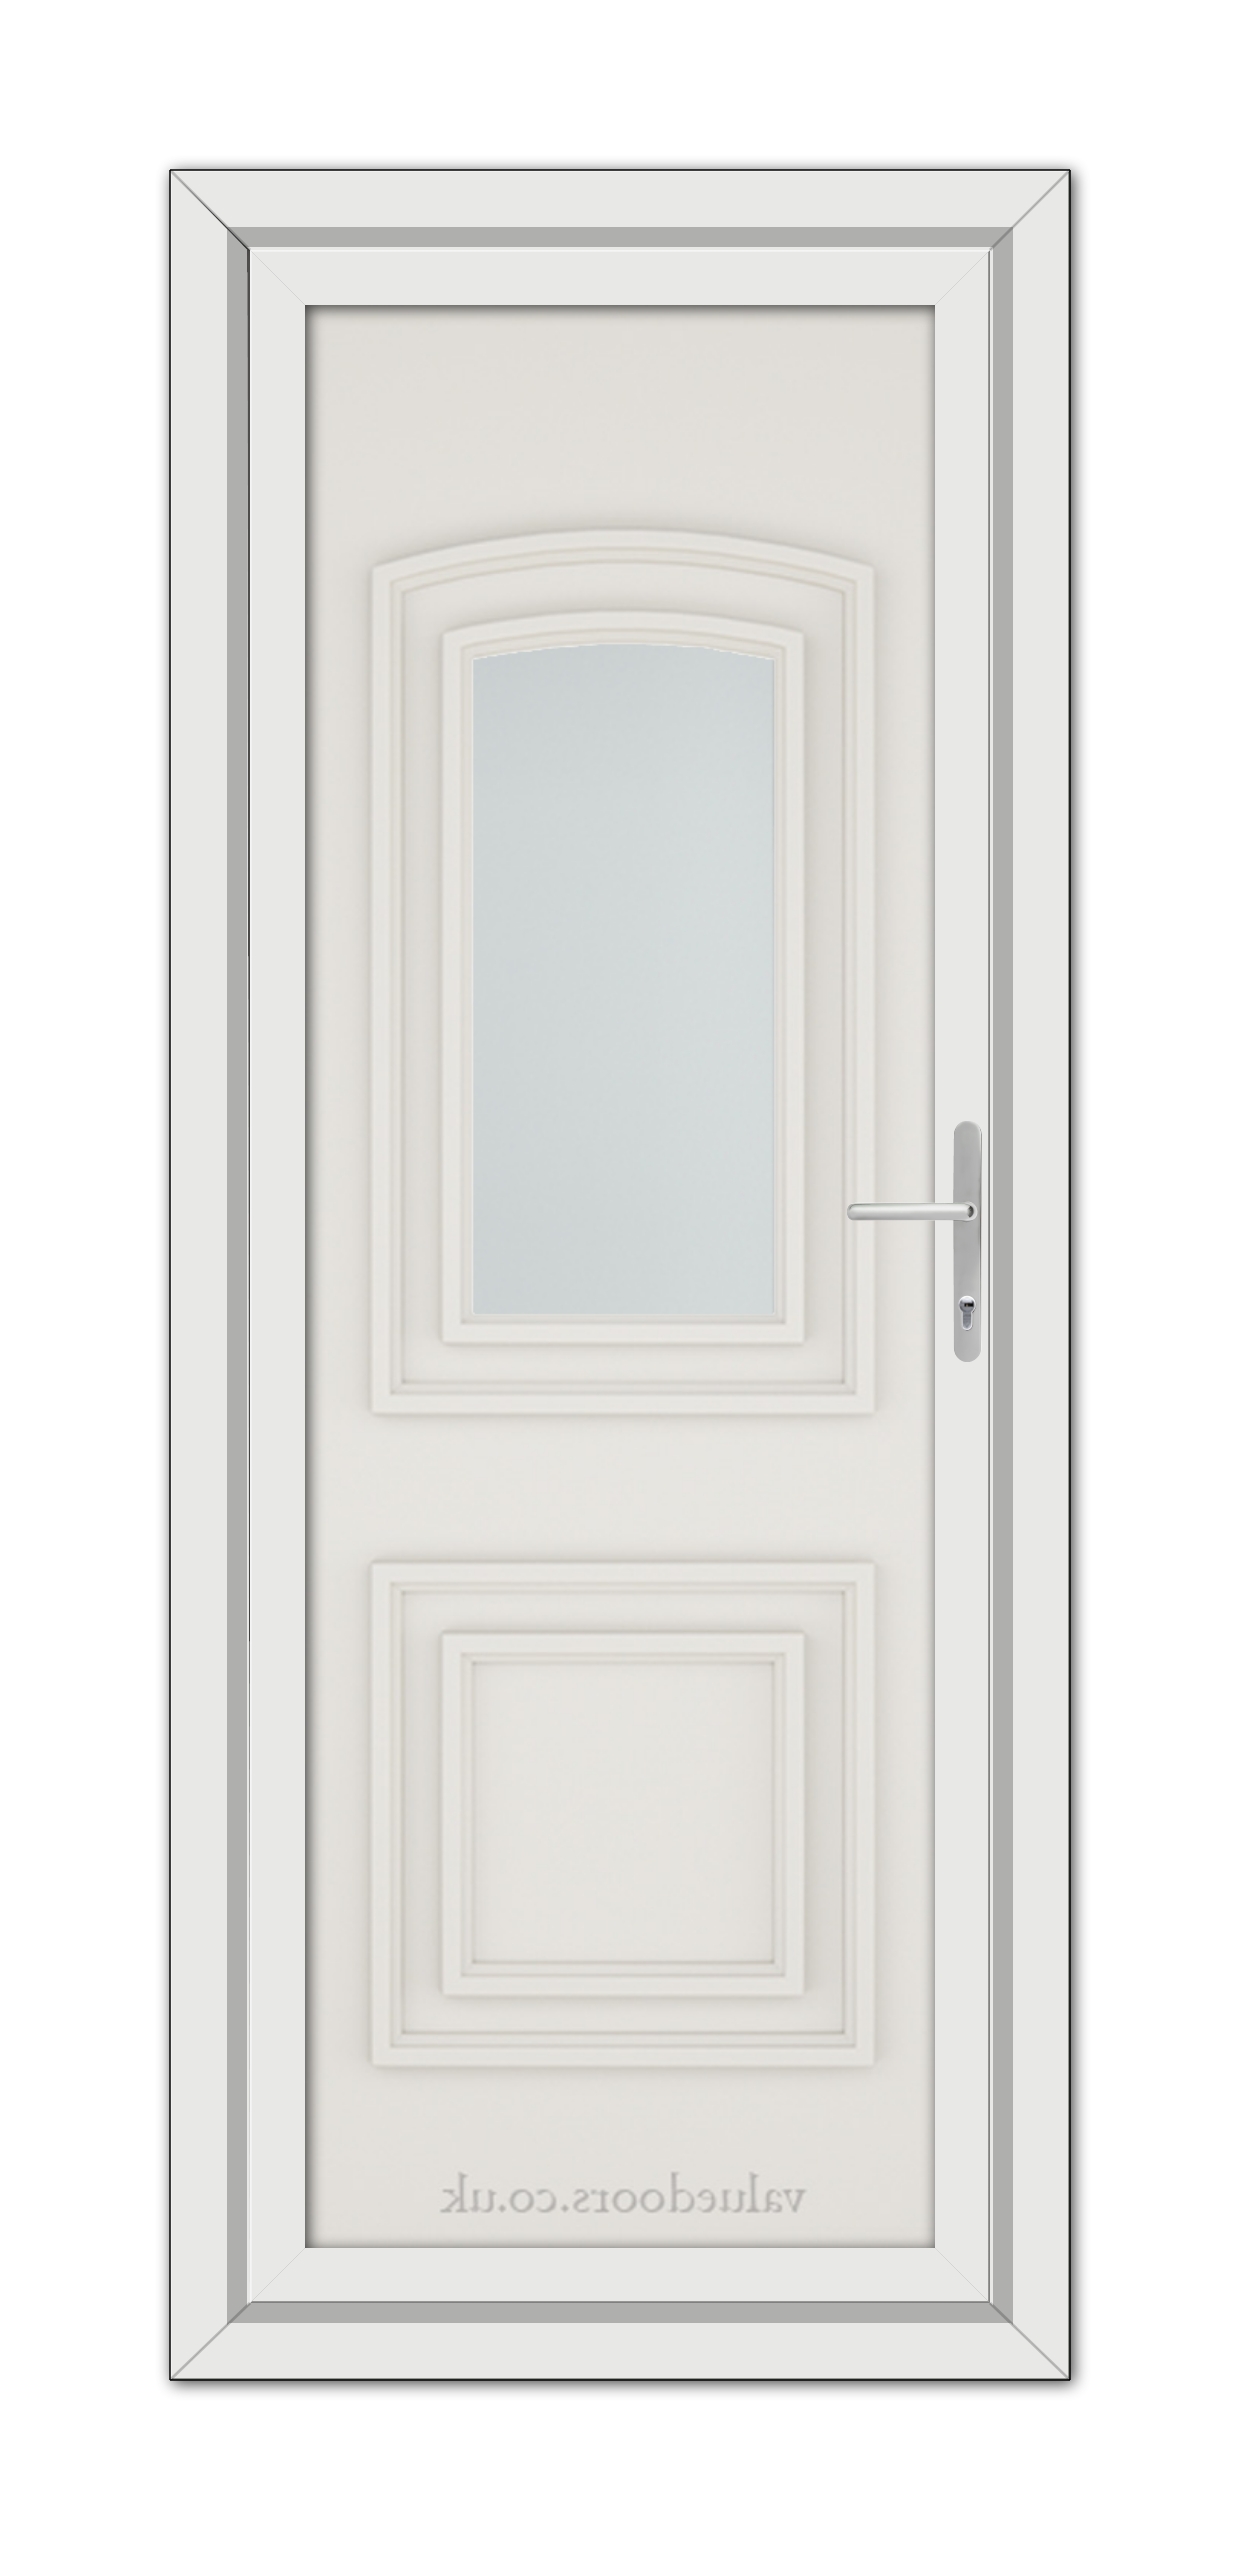 A White Cream Balmoral One uPVC Door with a glass panel.